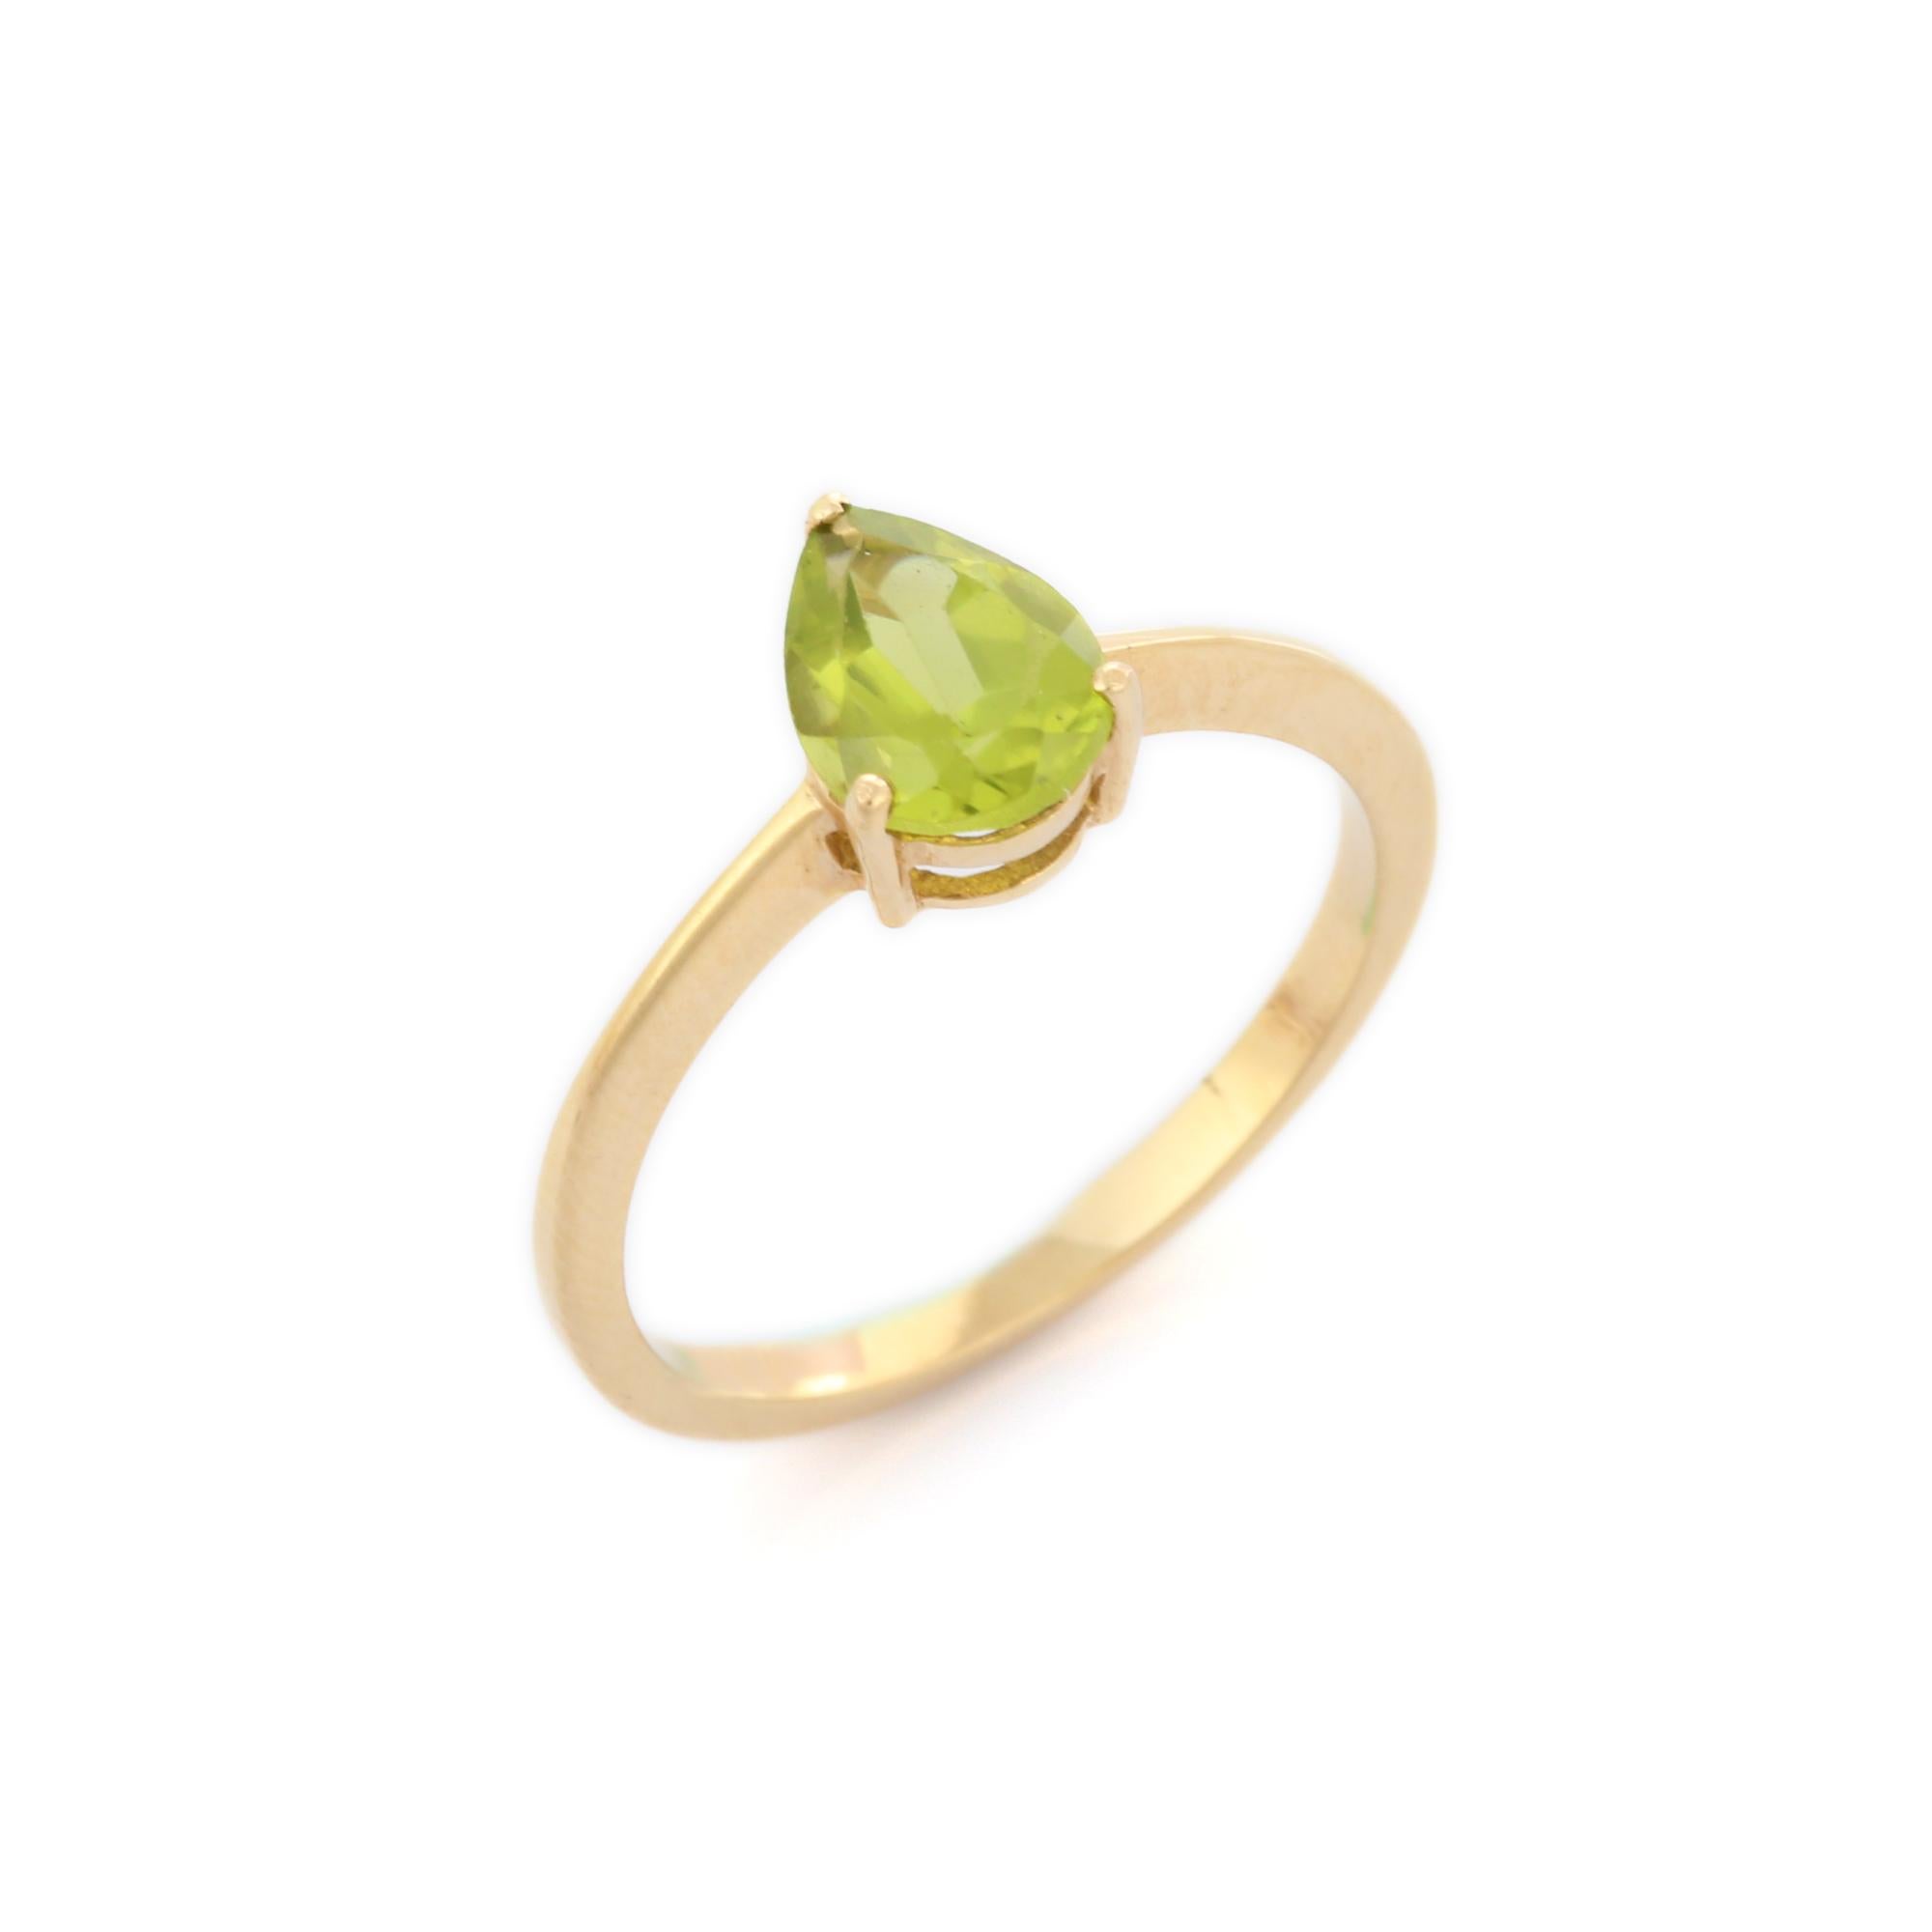 For Sale:  Pear Cut Peridot Solitaire Ring in 14K Yellow Gold 5